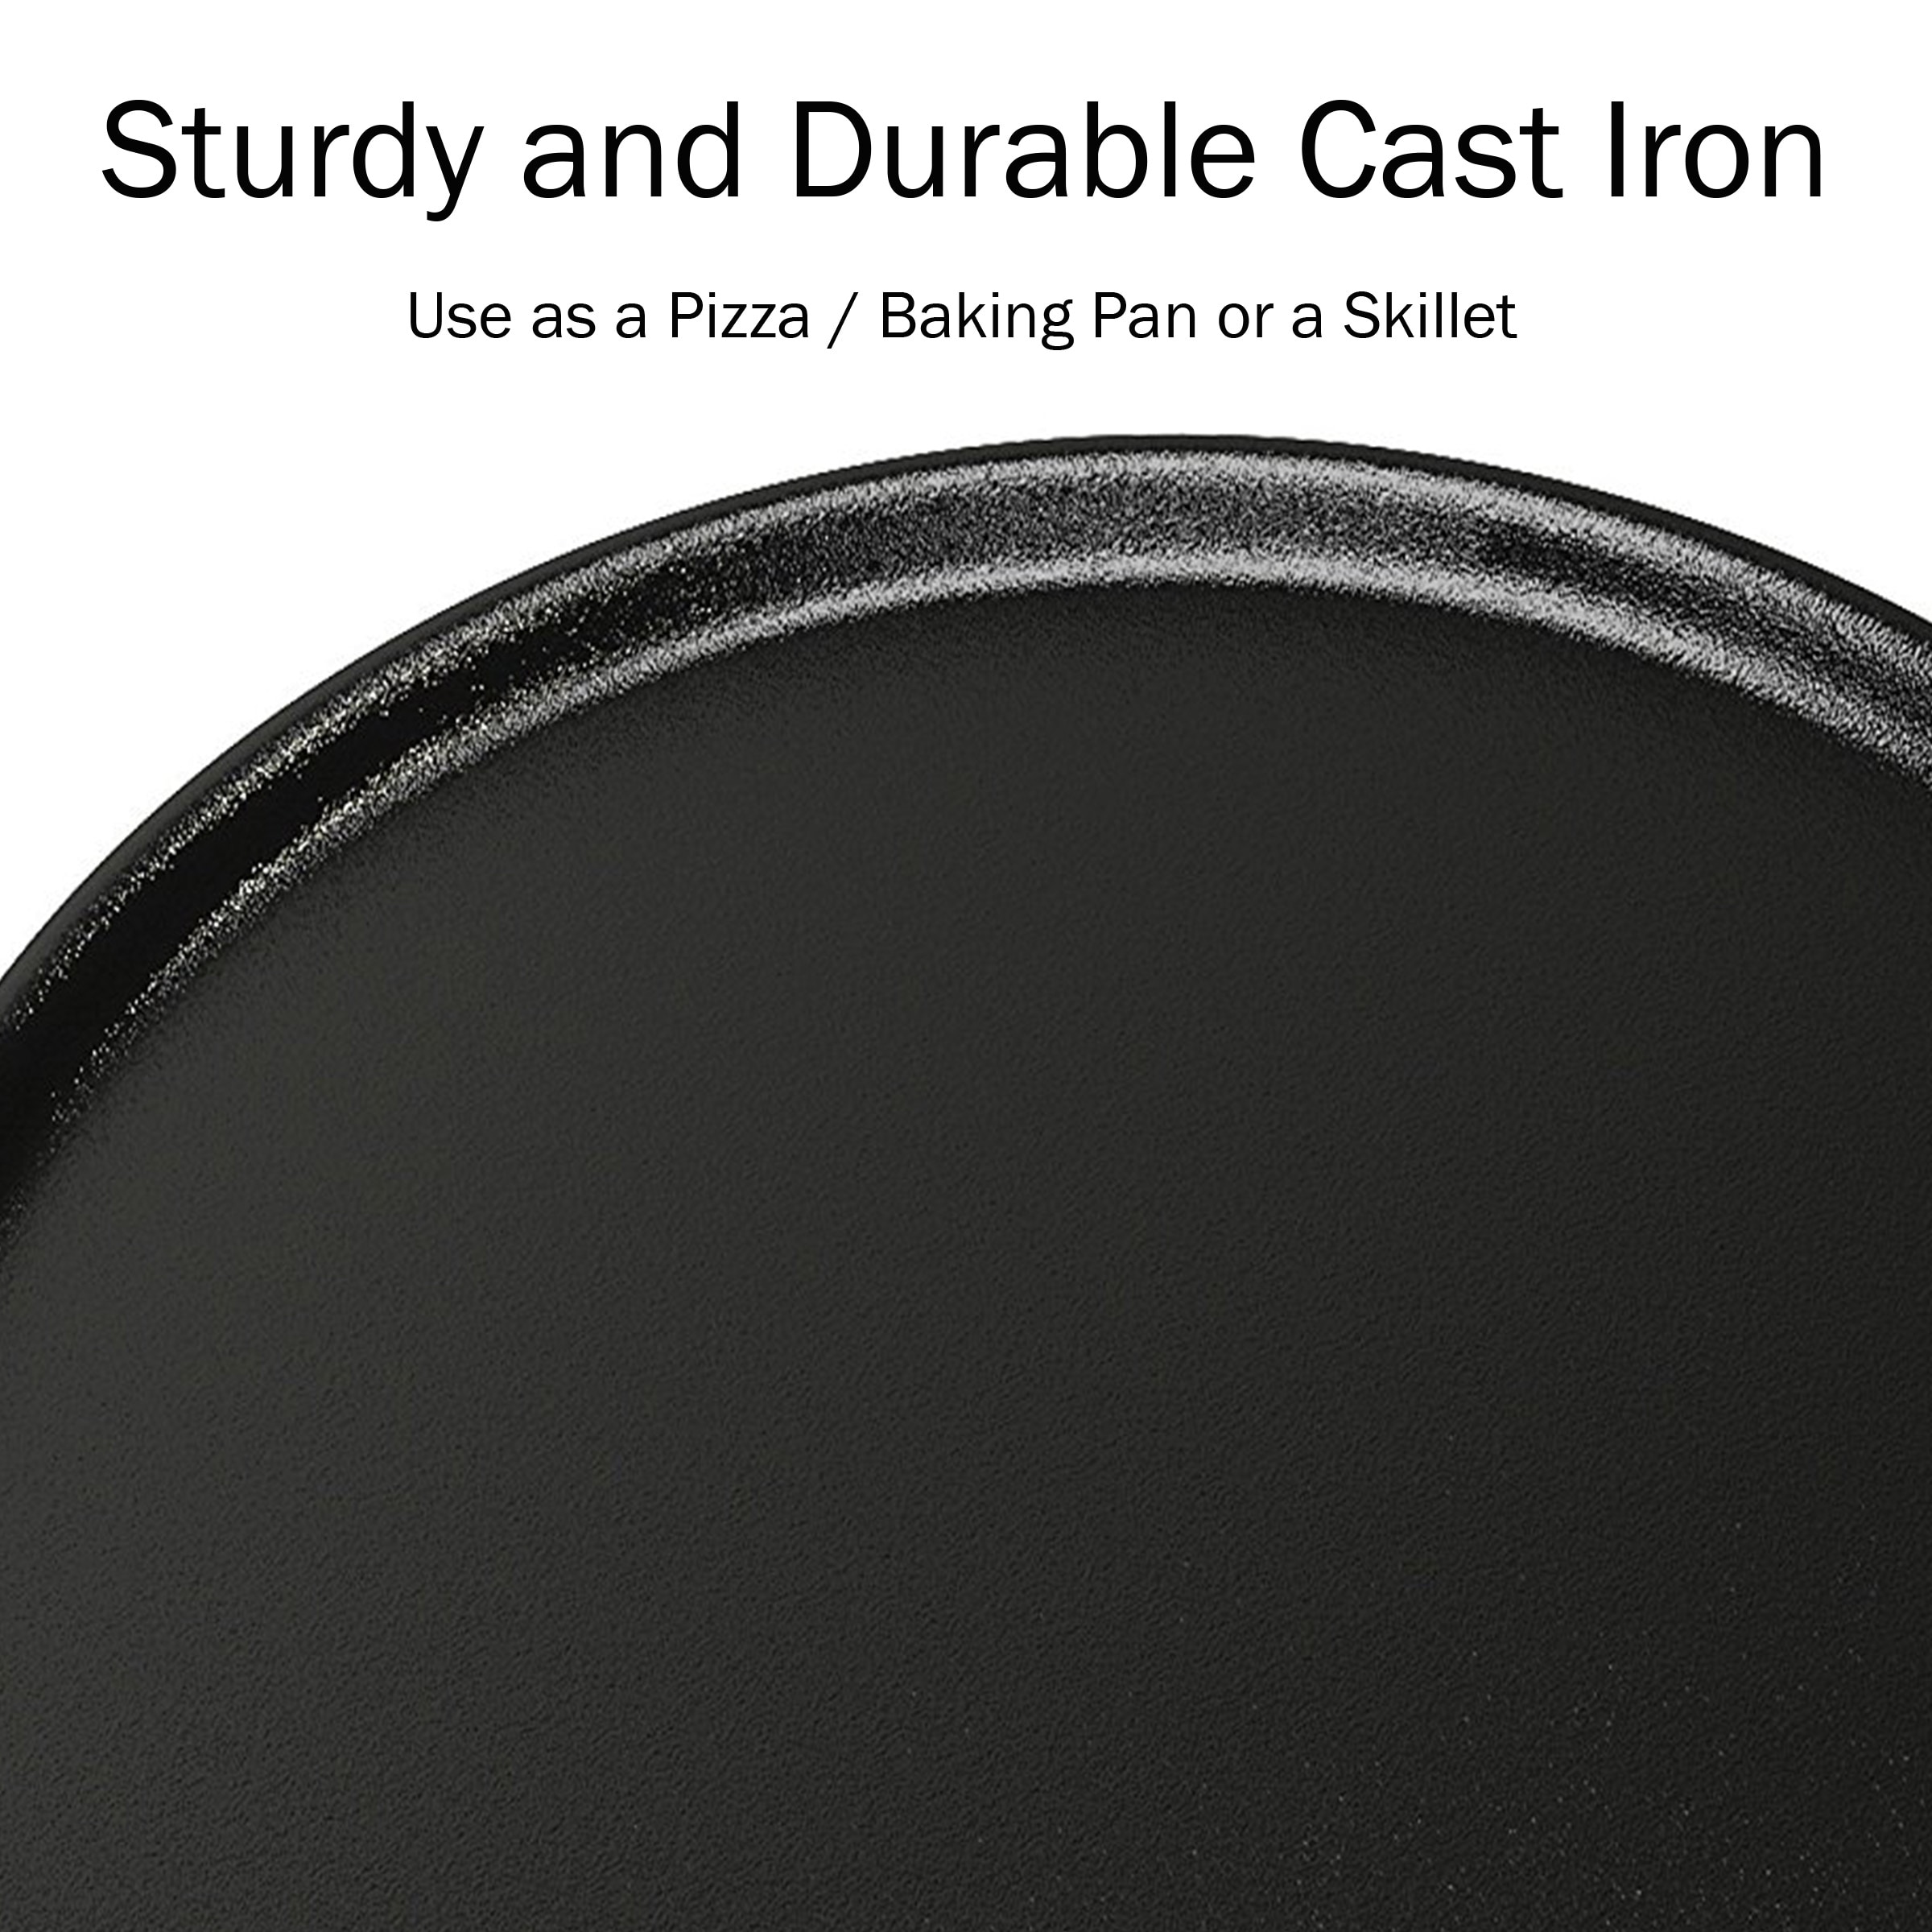  Max K 14-Inch Pizza Pan with Handles - Preseasoned Cast Iron  Cooking Pan for Baking, Roasting, Frying - Black: Home & Kitchen